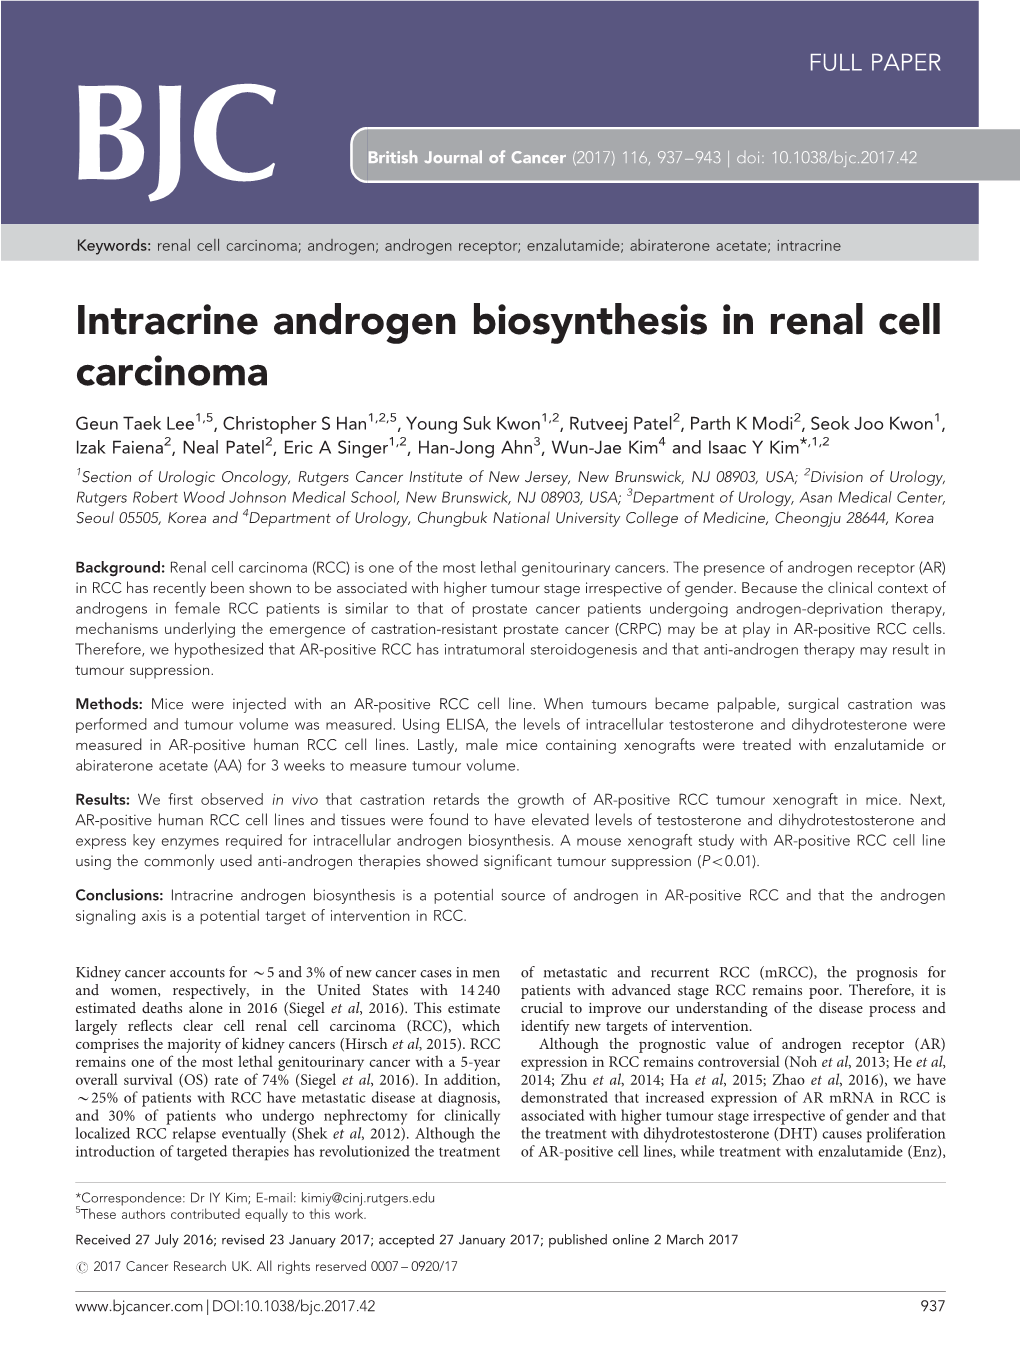 Intracrine Androgen Biosynthesis in Renal Cell Carcinoma